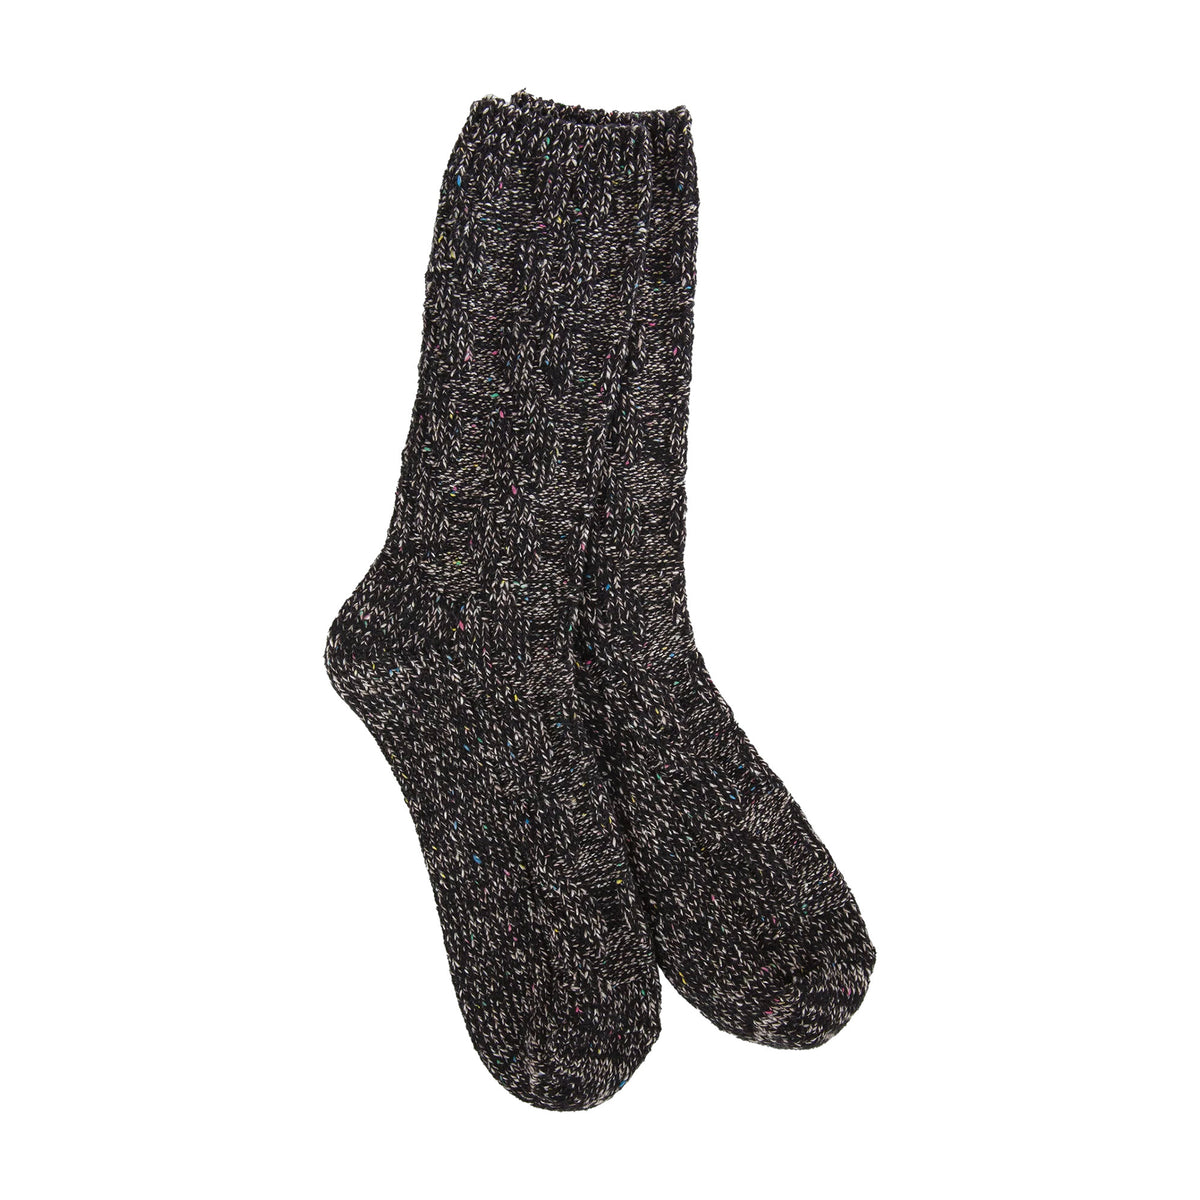 A pair of stylish black speckled Worlds Softest Ragg Cable Crew Socks isolated on a white background.